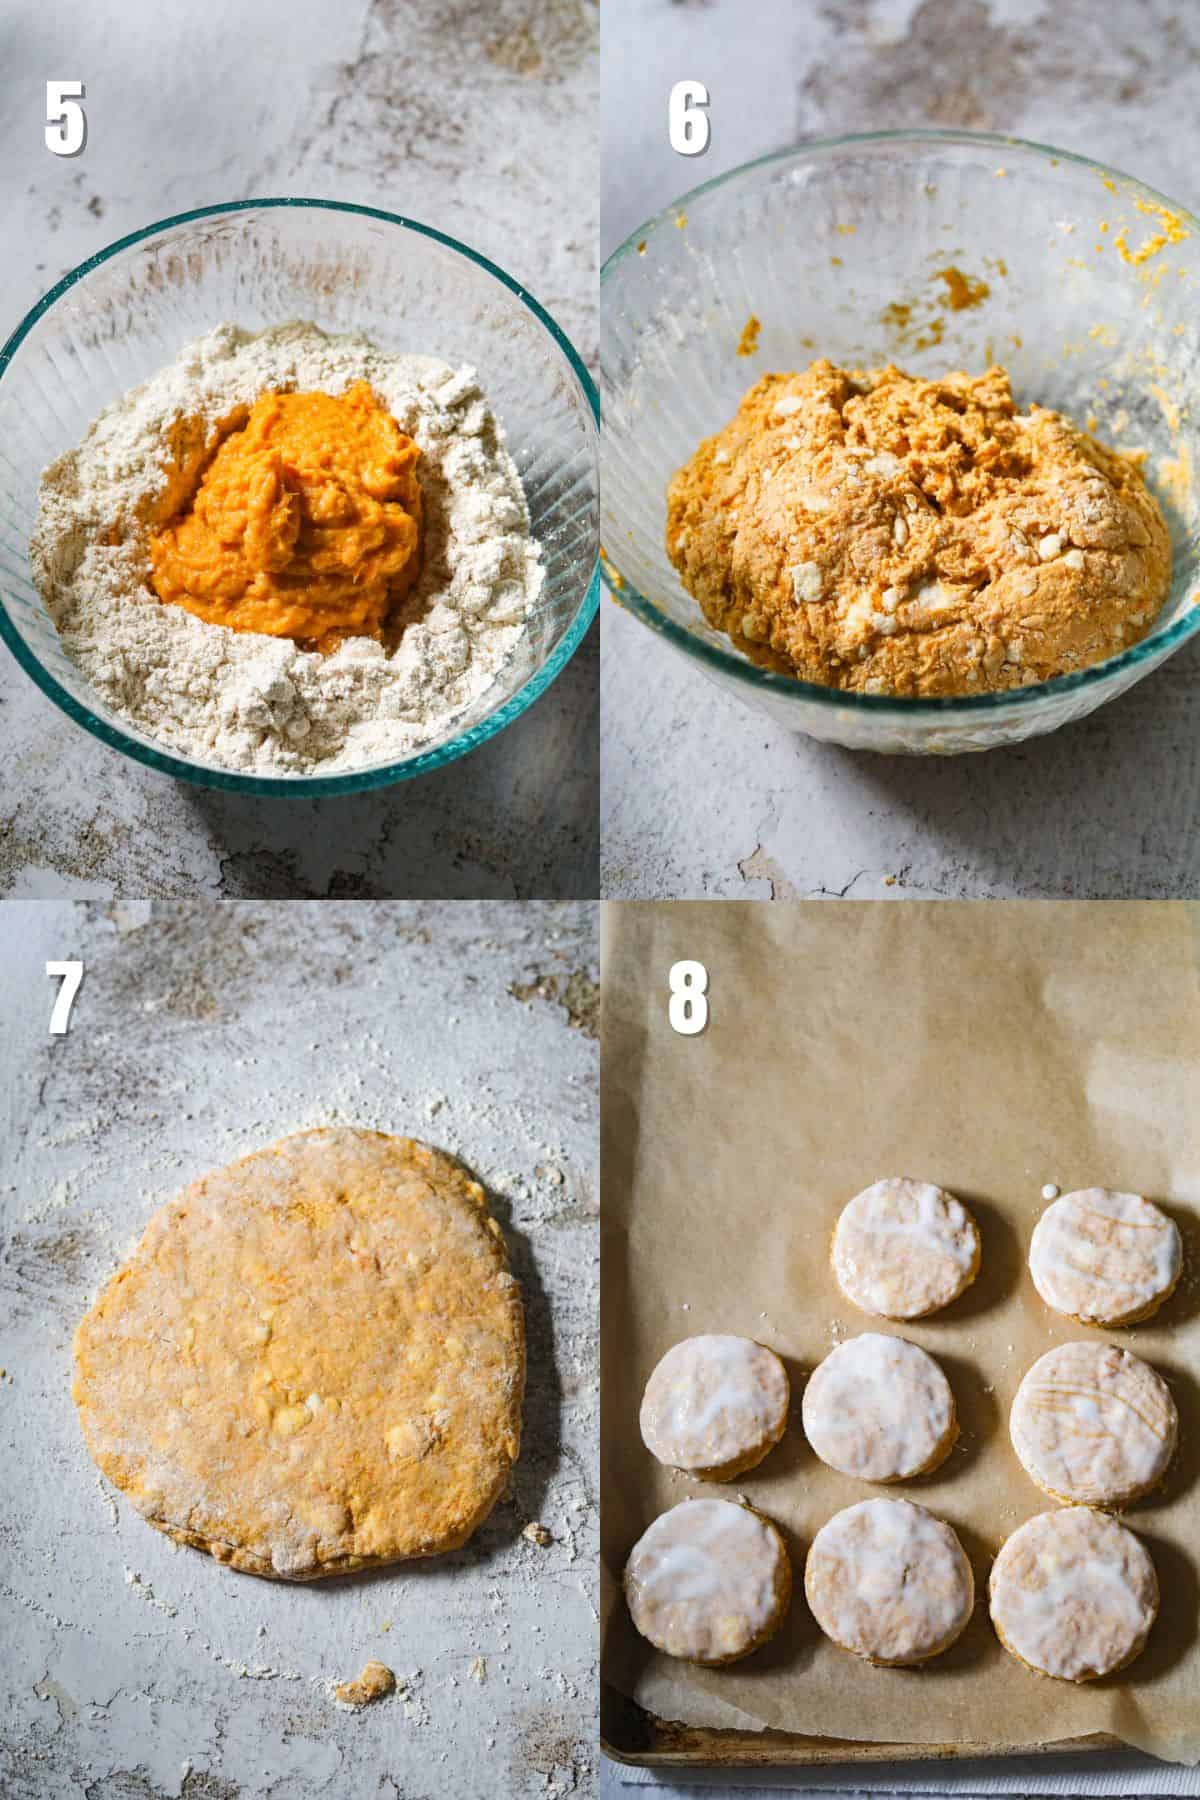 Step by step images for making sweet potato biscuits.